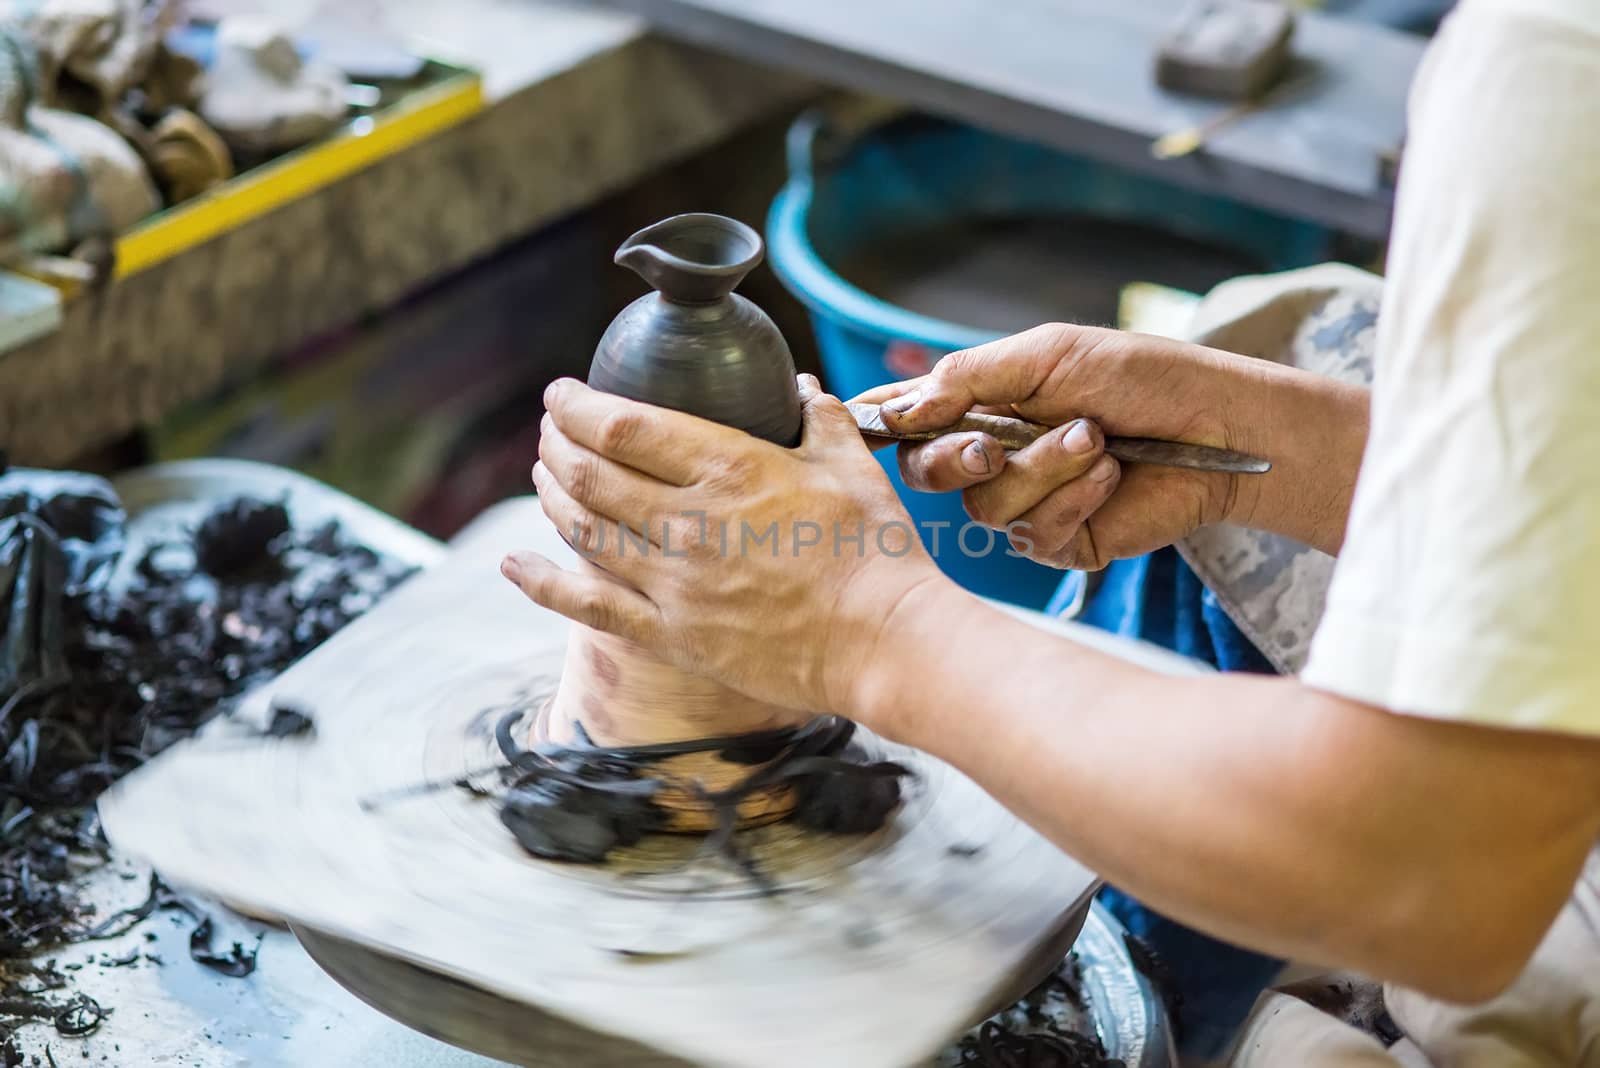 Hands working on pottery wheel by Yuri2012